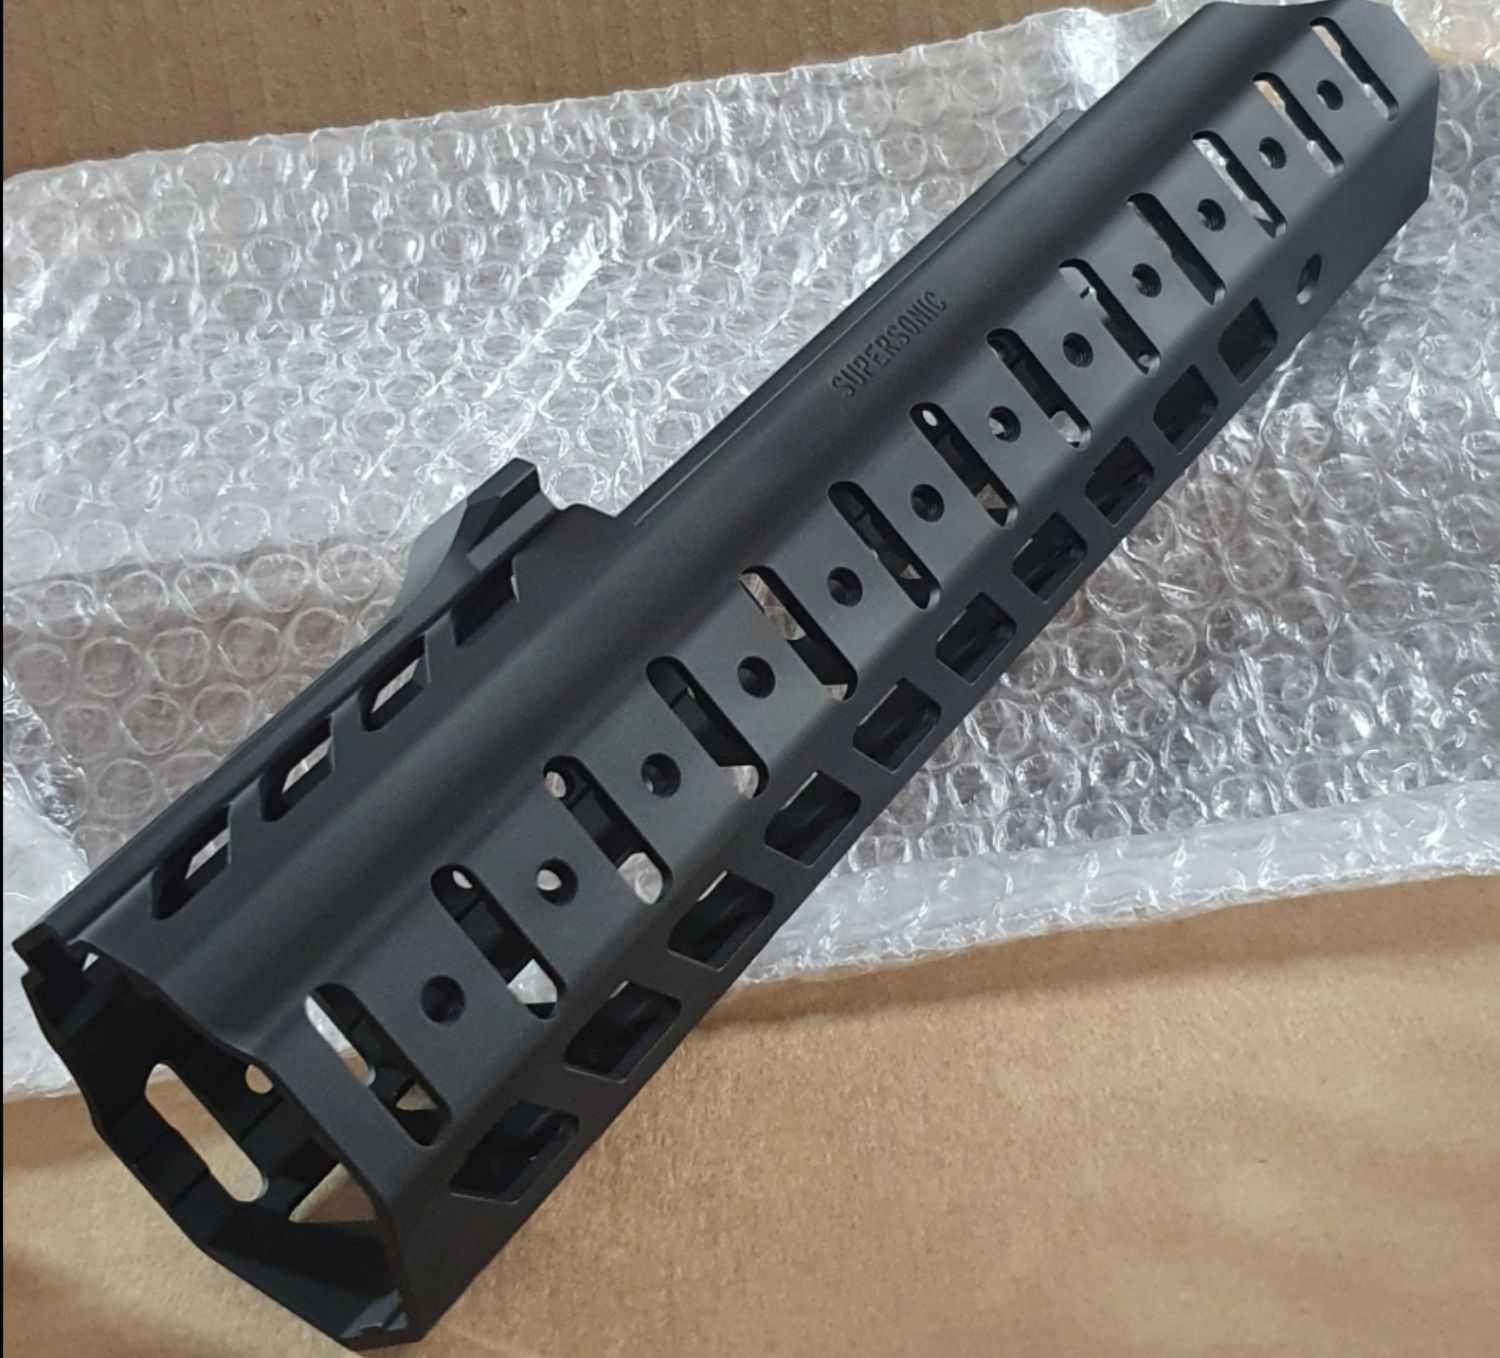 Sig sauer mcx lvaw rail Reduced! - Parts - Airsoft Forums UK